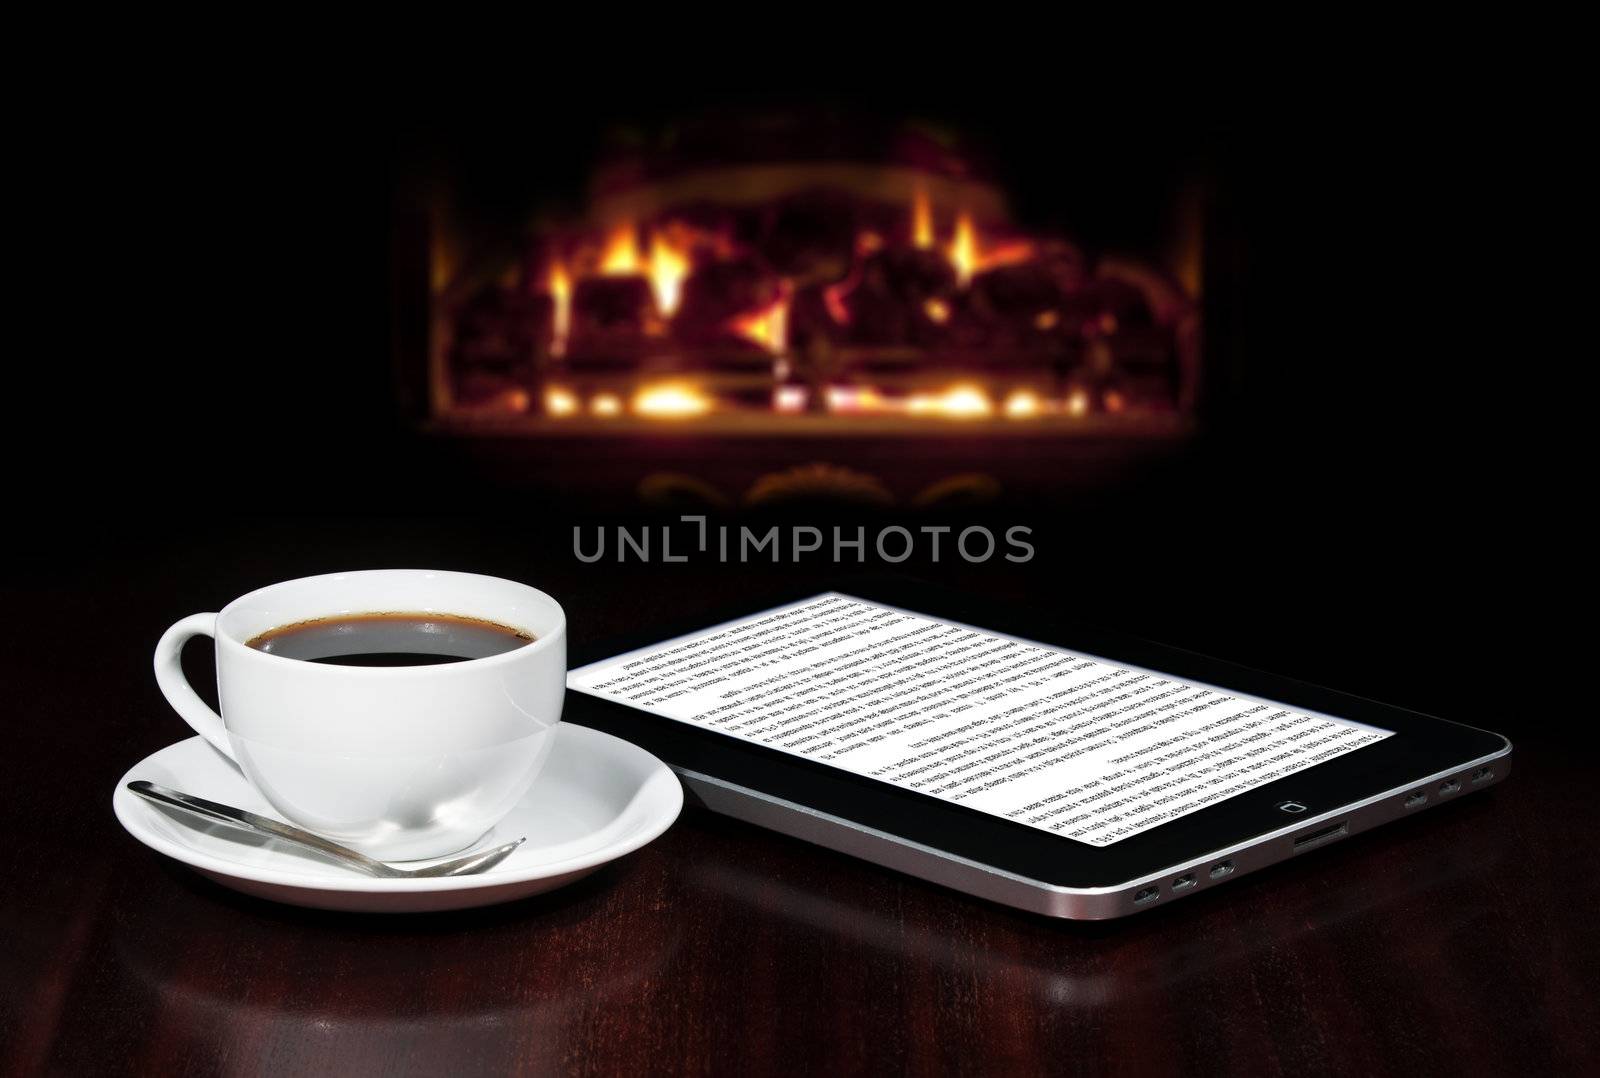 Cap of coffee and tablet on the table top with fireplace in the background.